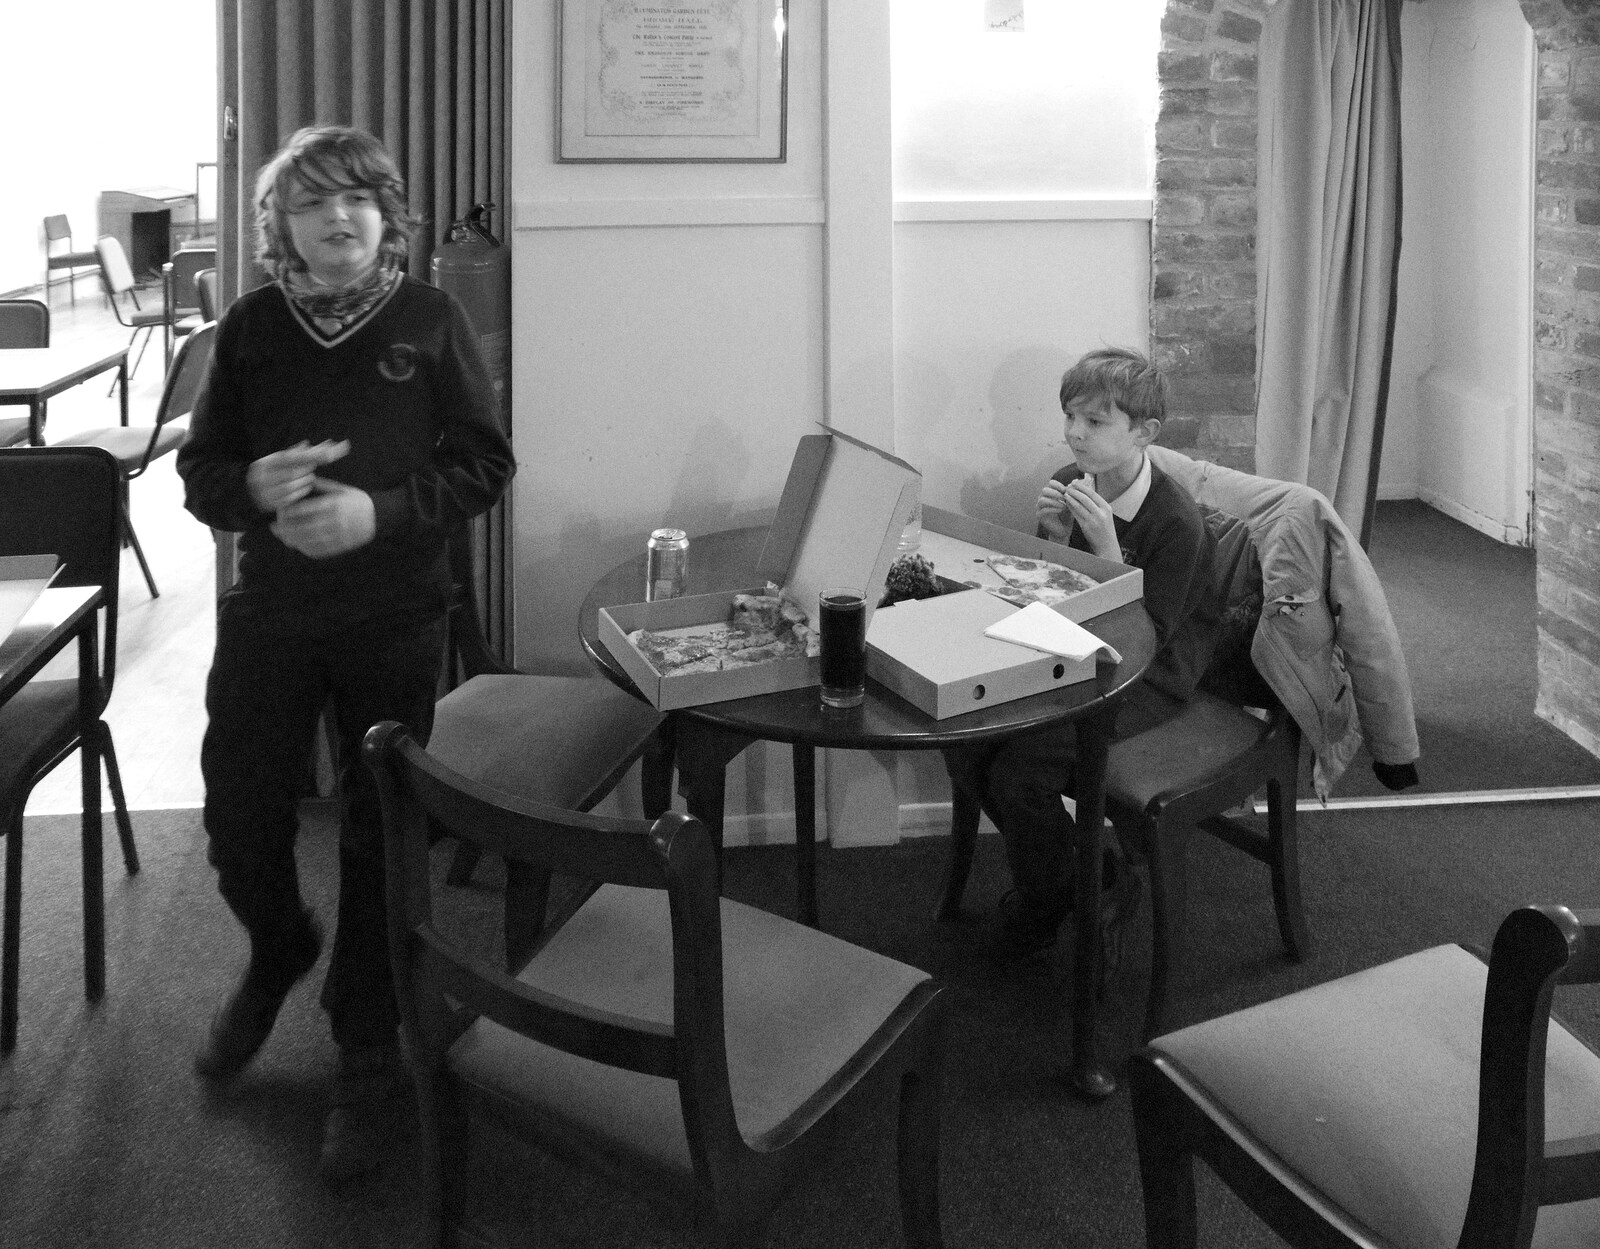 Fred and Harry scoff pizza from Supercharged Electrons and Pizza at the Village Hall, Brome, Suffolk - 23rd January 2022